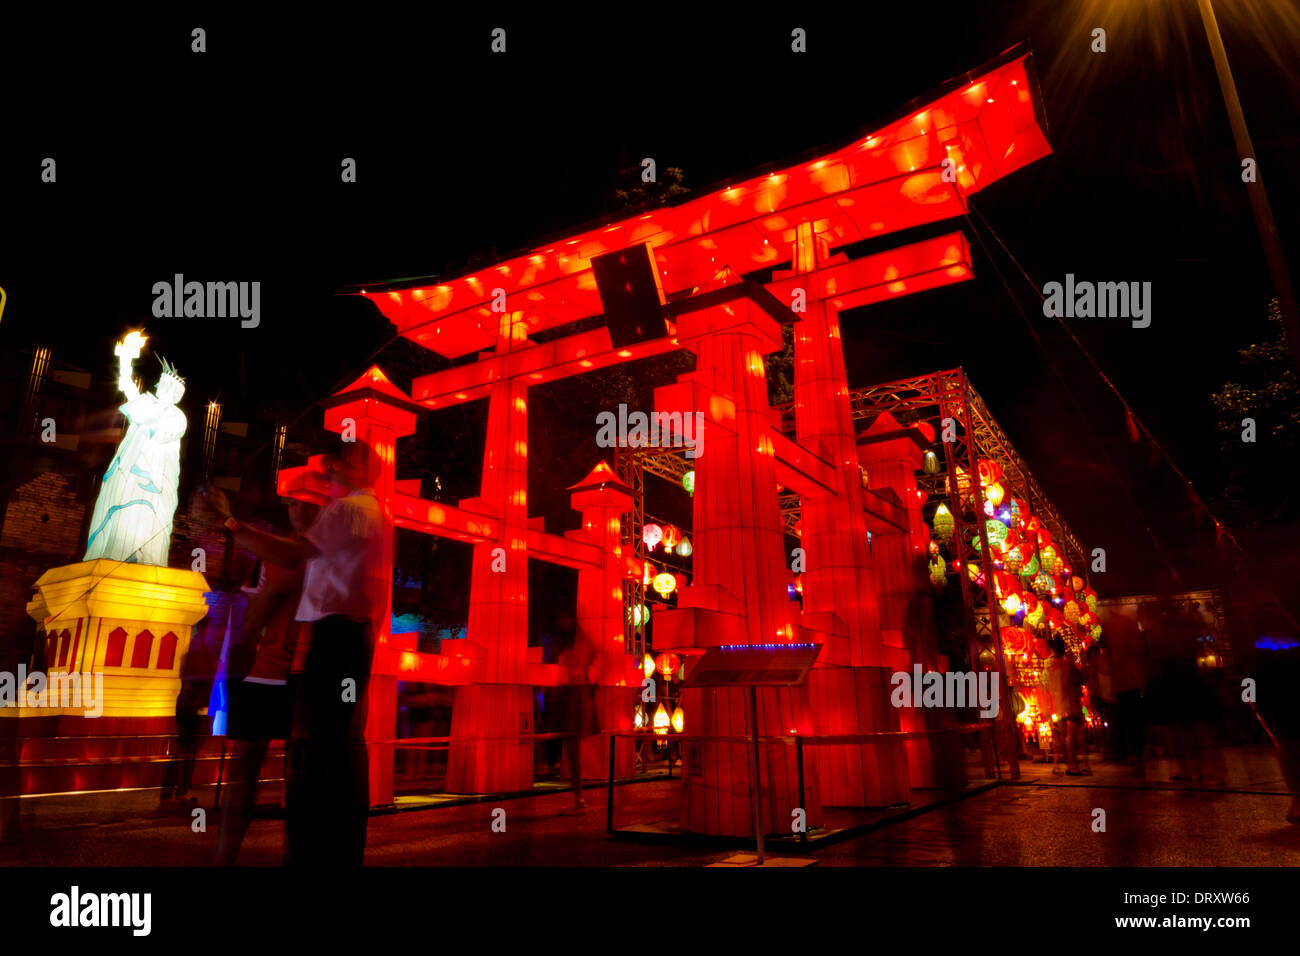 CHIANGMAI-AUGUST 27 : "Lantern Red Gate" at Thailand International Lantern Festival on August 27, 2013 in Chiang Mai. Stock Photo